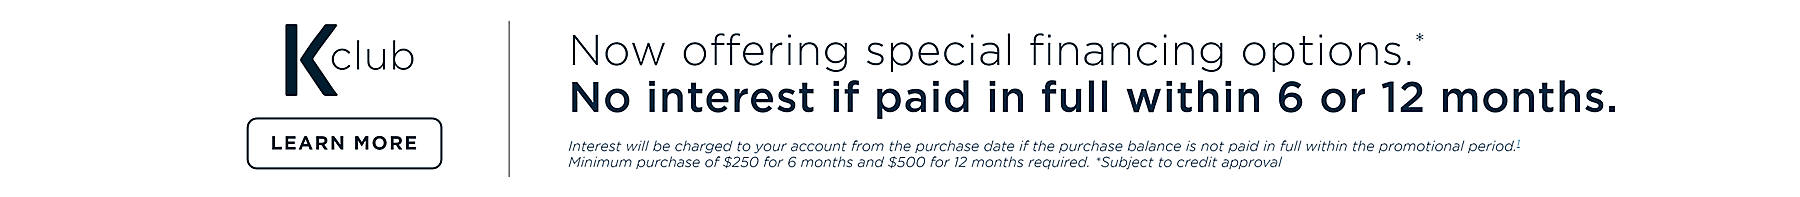 K-club Now offering special financing options.* No interest if paid in full within 6 or 12 months. Interest will be charged to your account from the purchase 071921 if the purchase balance is not paid in full within the promotional period.1 Minimum purchase of $250 for 6 months and $500 for 12 months required. *Subject to credit approval. Learn more